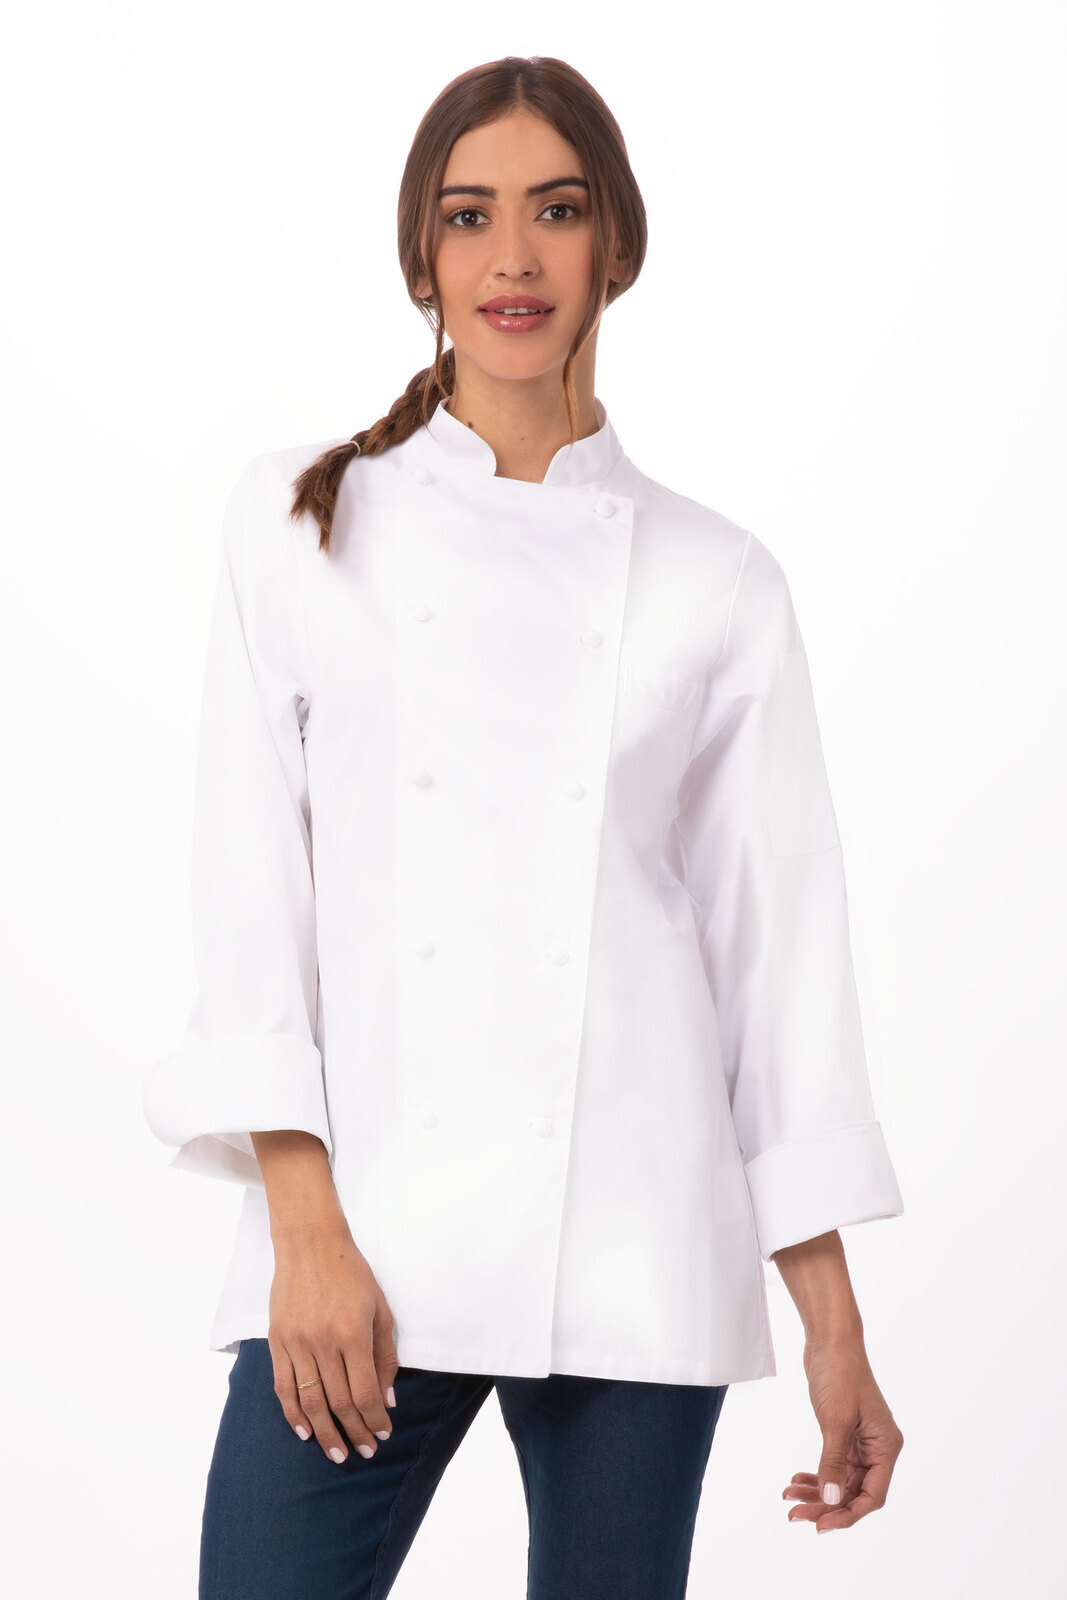 Chef Works Australia | Culinary Wear, Clothing and Uniforms for ...